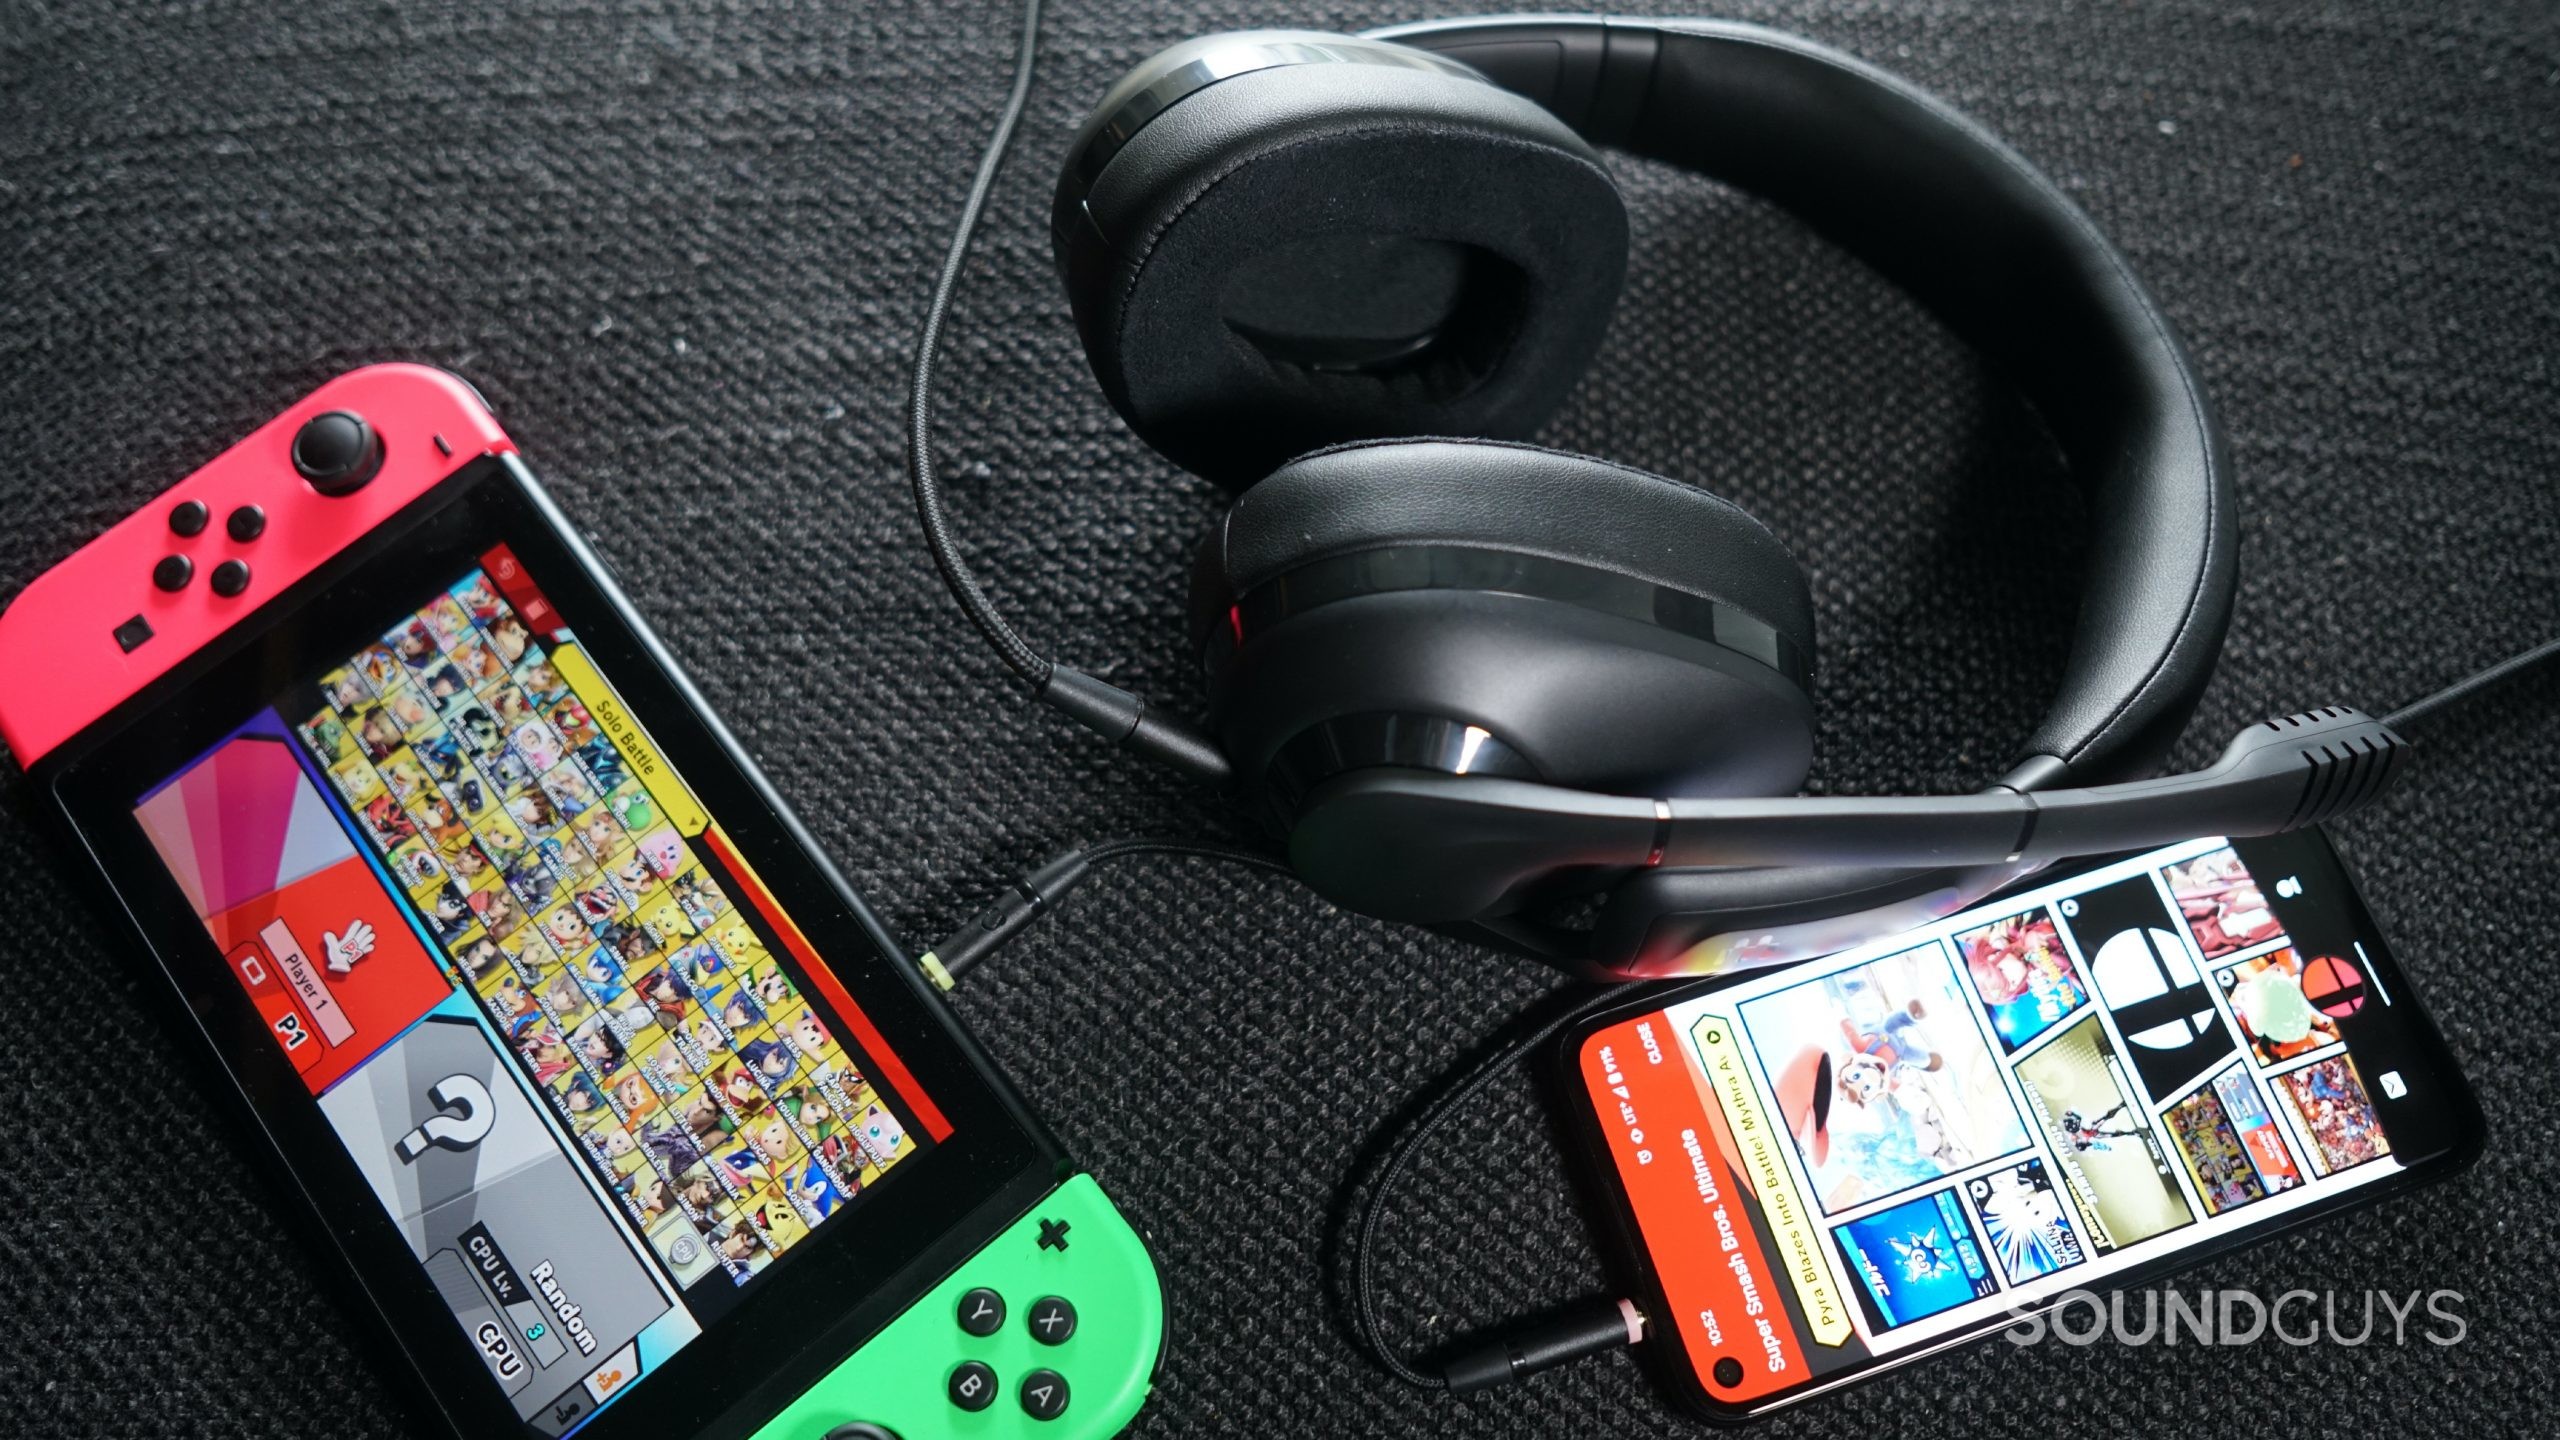 The EPOS H3 gaming headset lays on a fabric surface plugged into the Nintendo Switch and Google Pixel 4a running the Nintendo Switch voice chat app